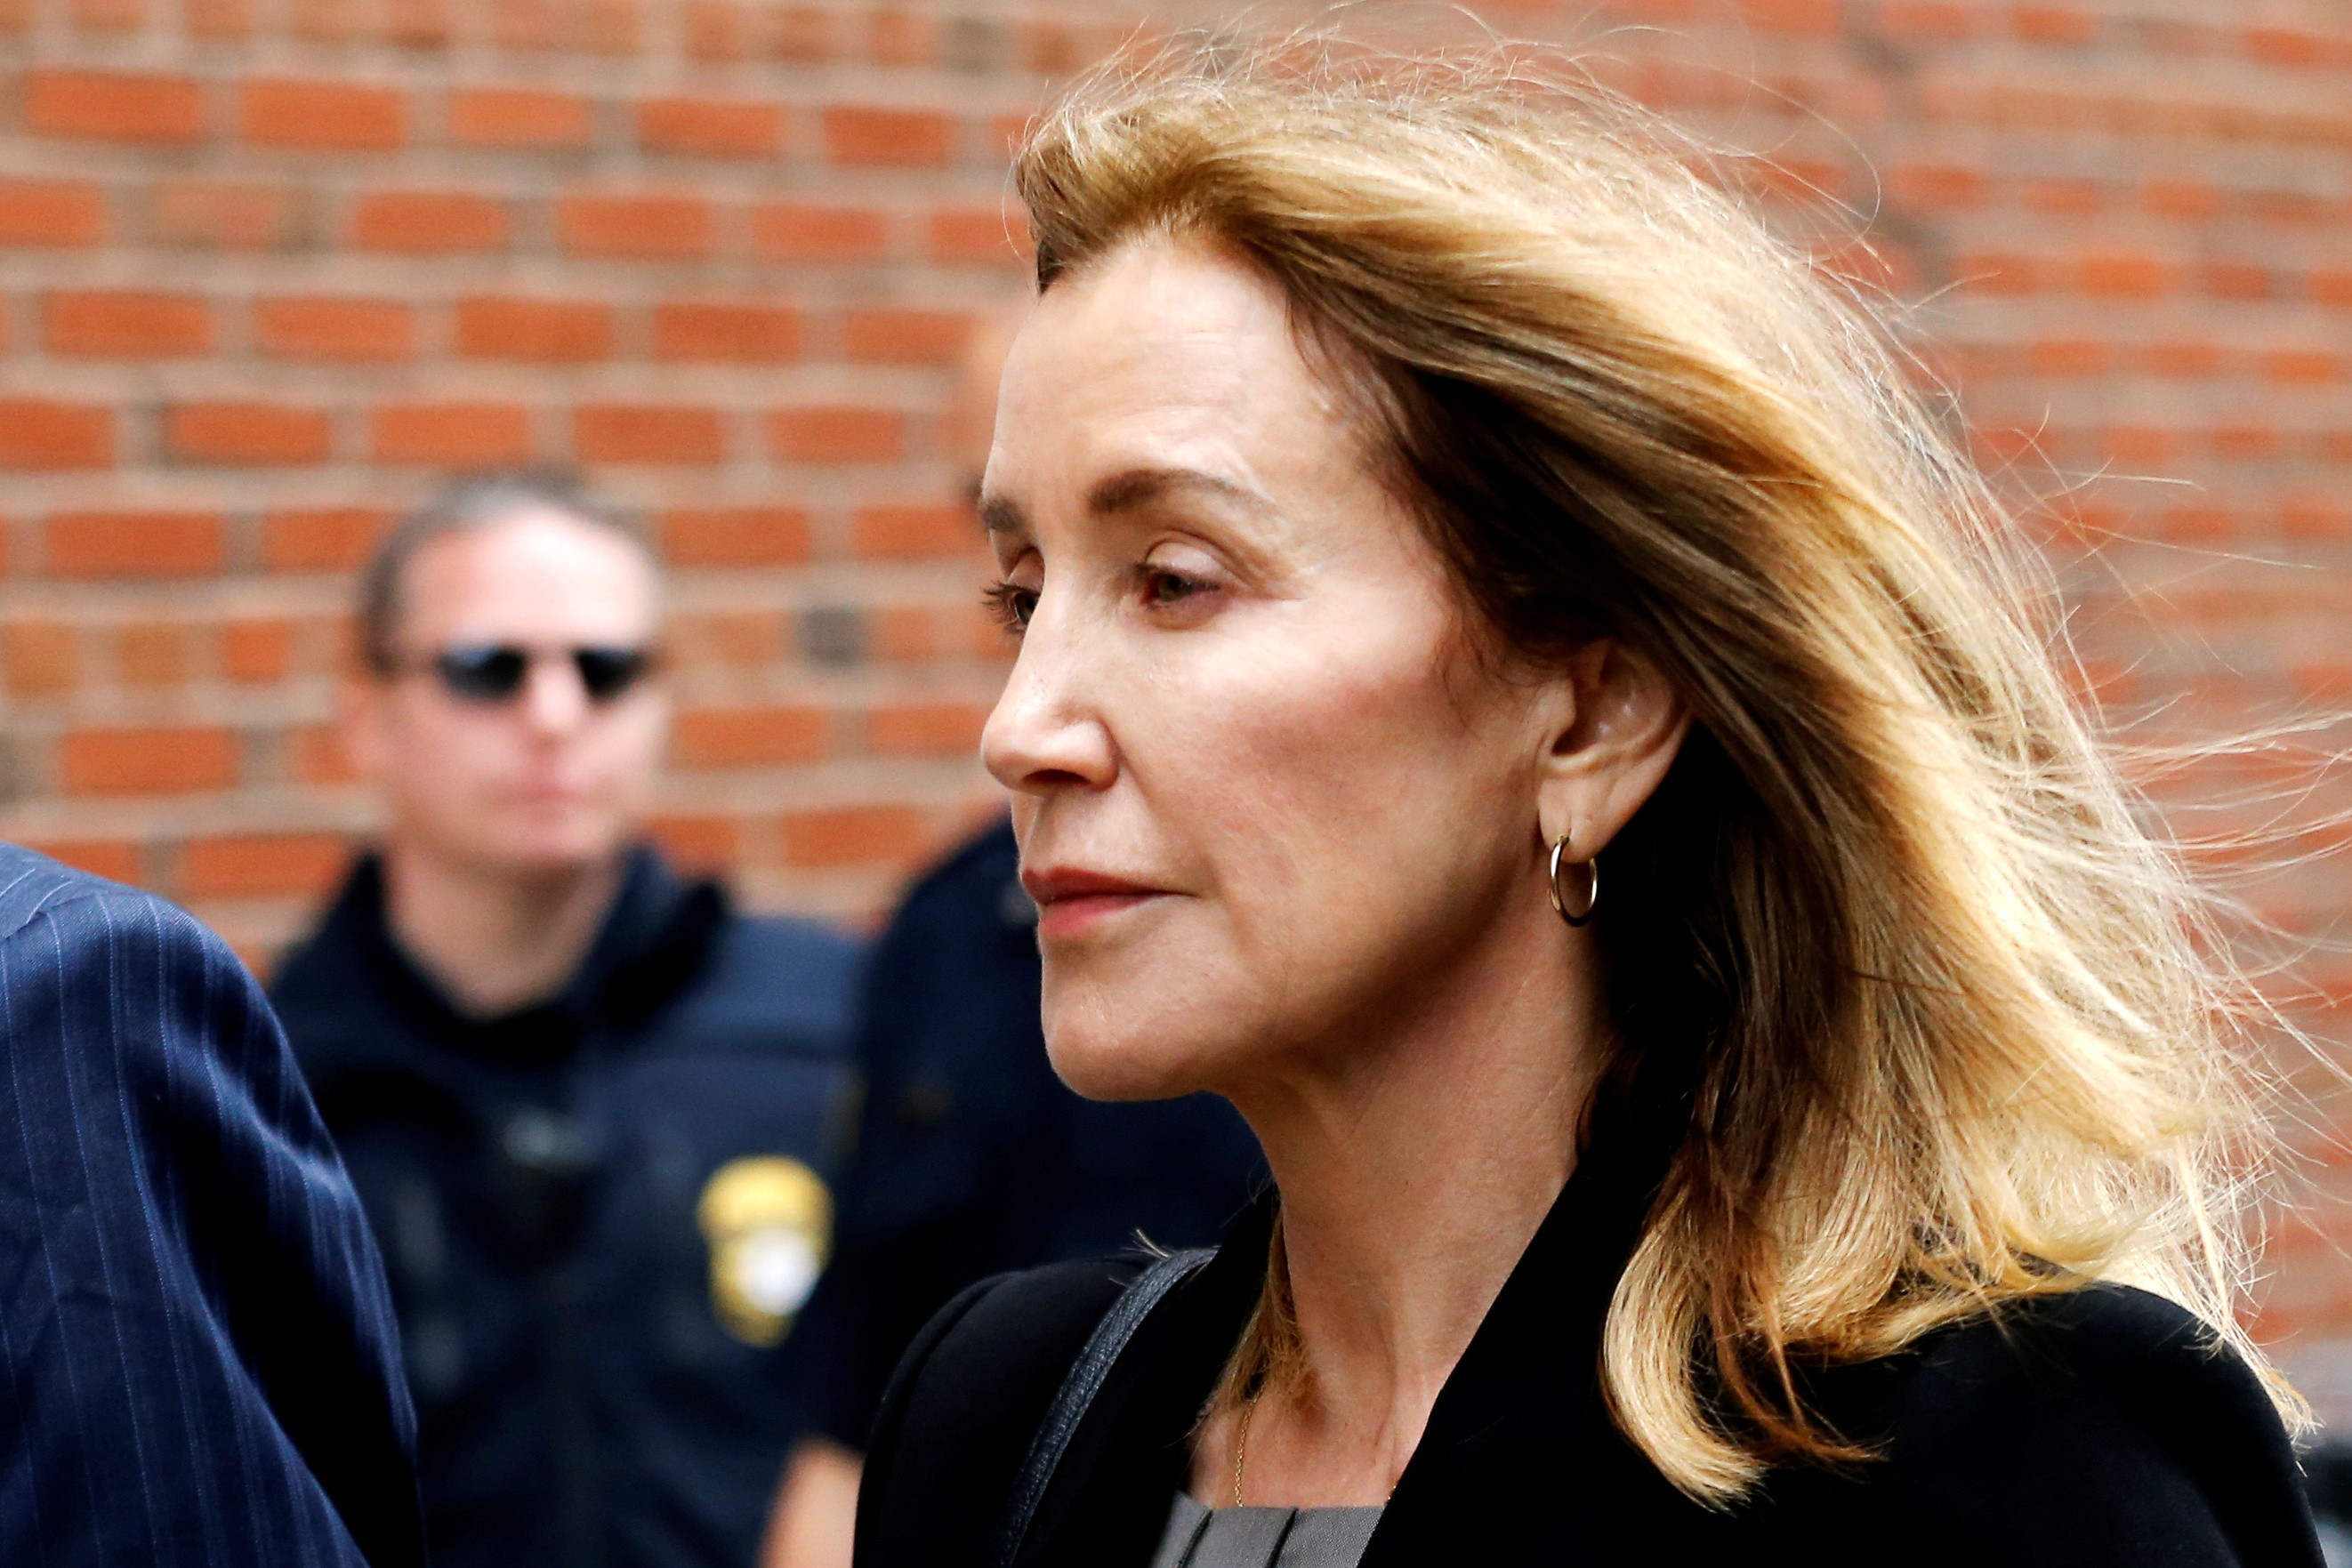 Felicity Huffman arrives at the federal courthouse in Boston, Massachusetts on Monday. Photo: Reuters